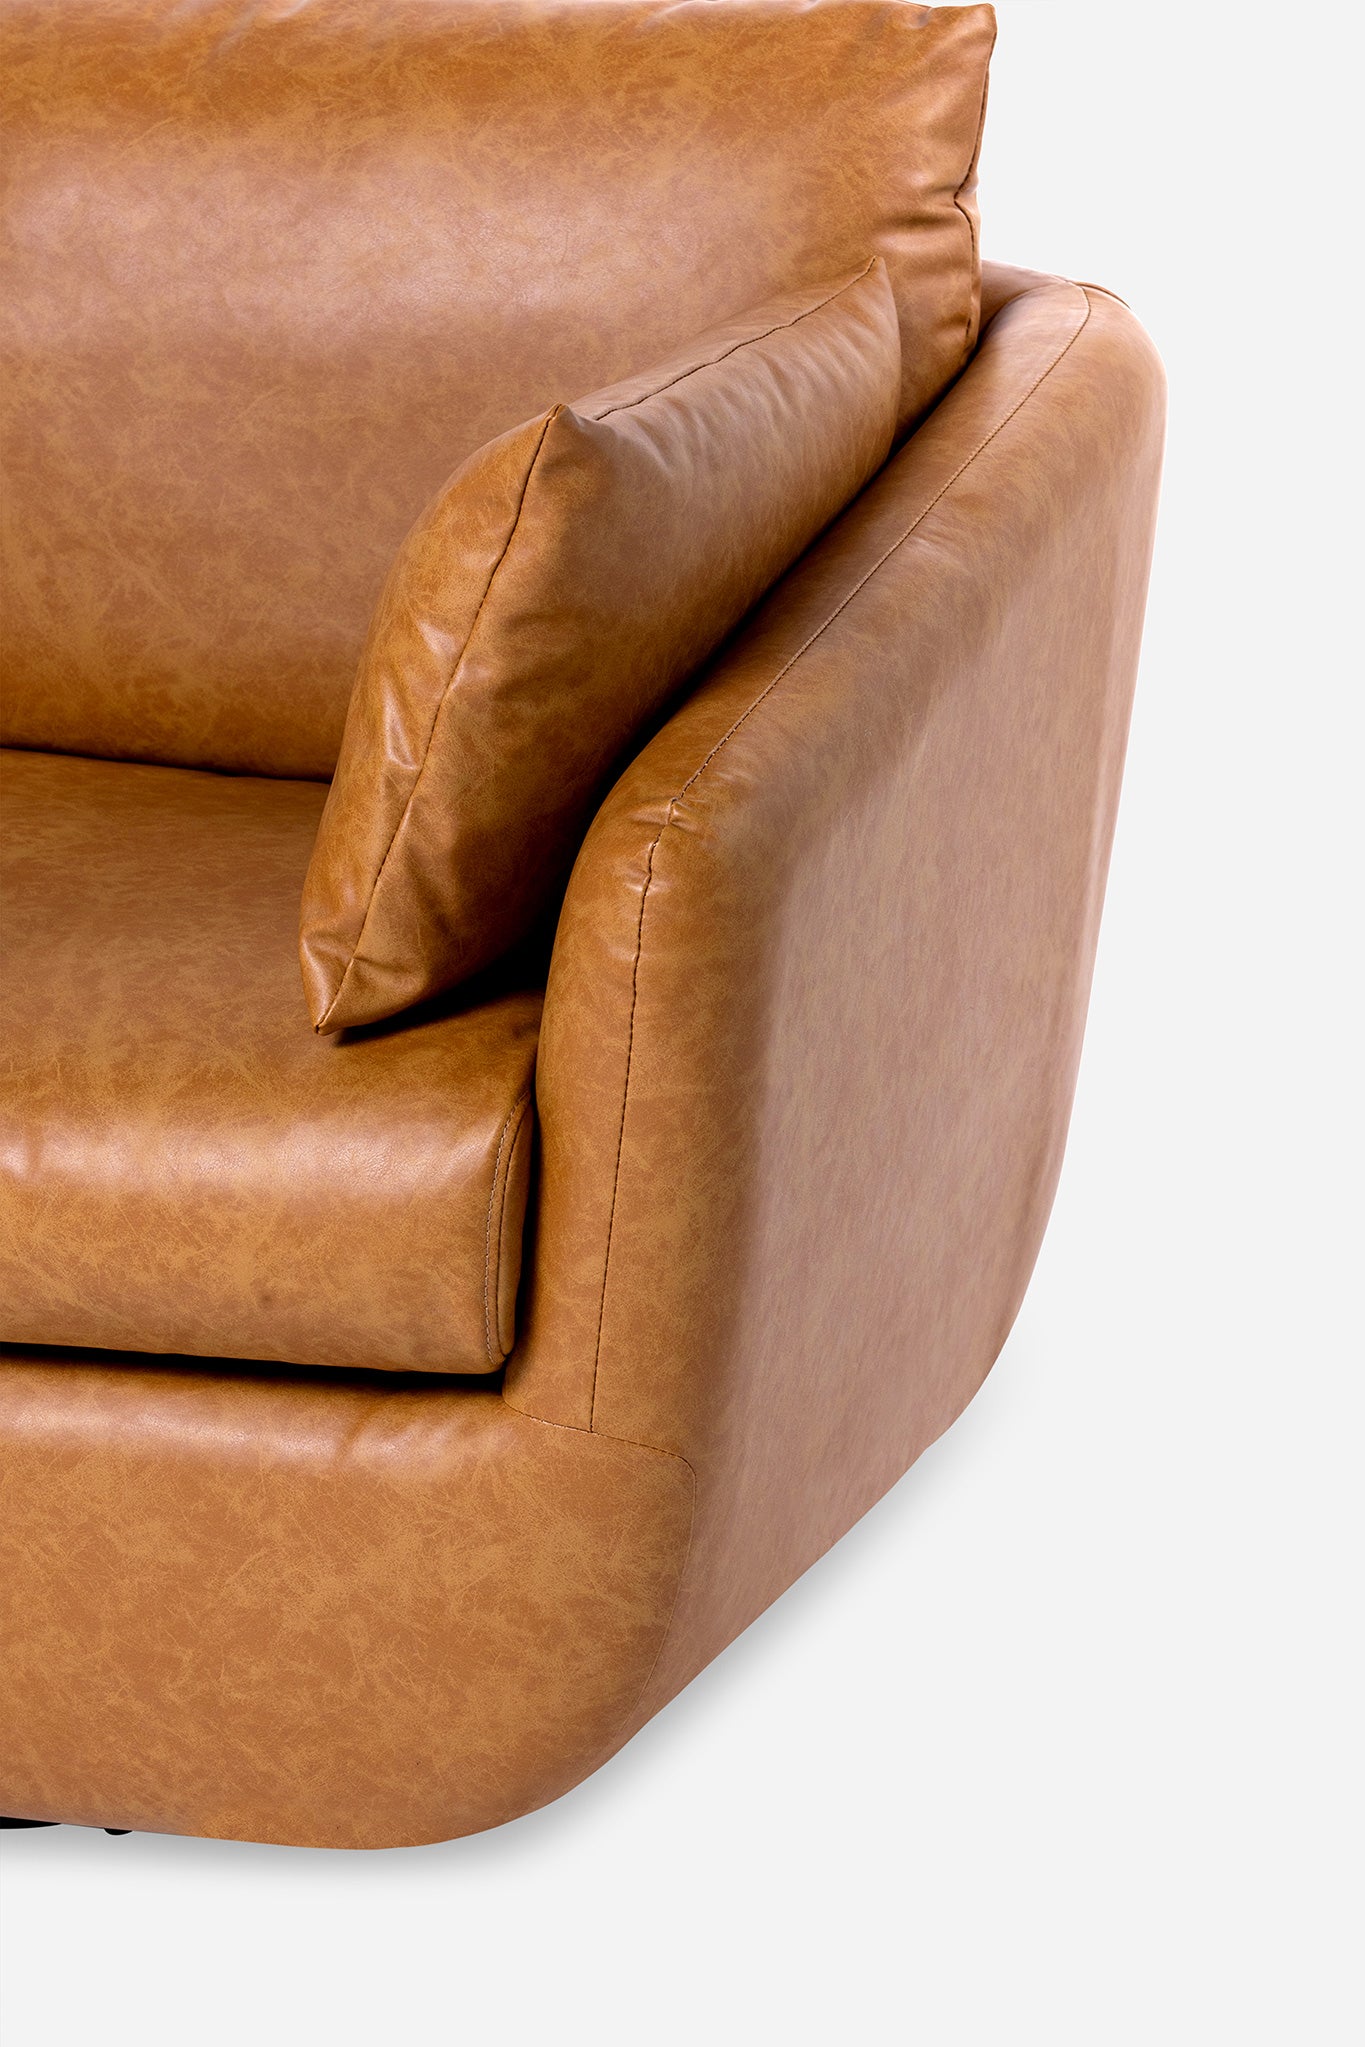 detail of the park swivel armchair in distressed vegan leather